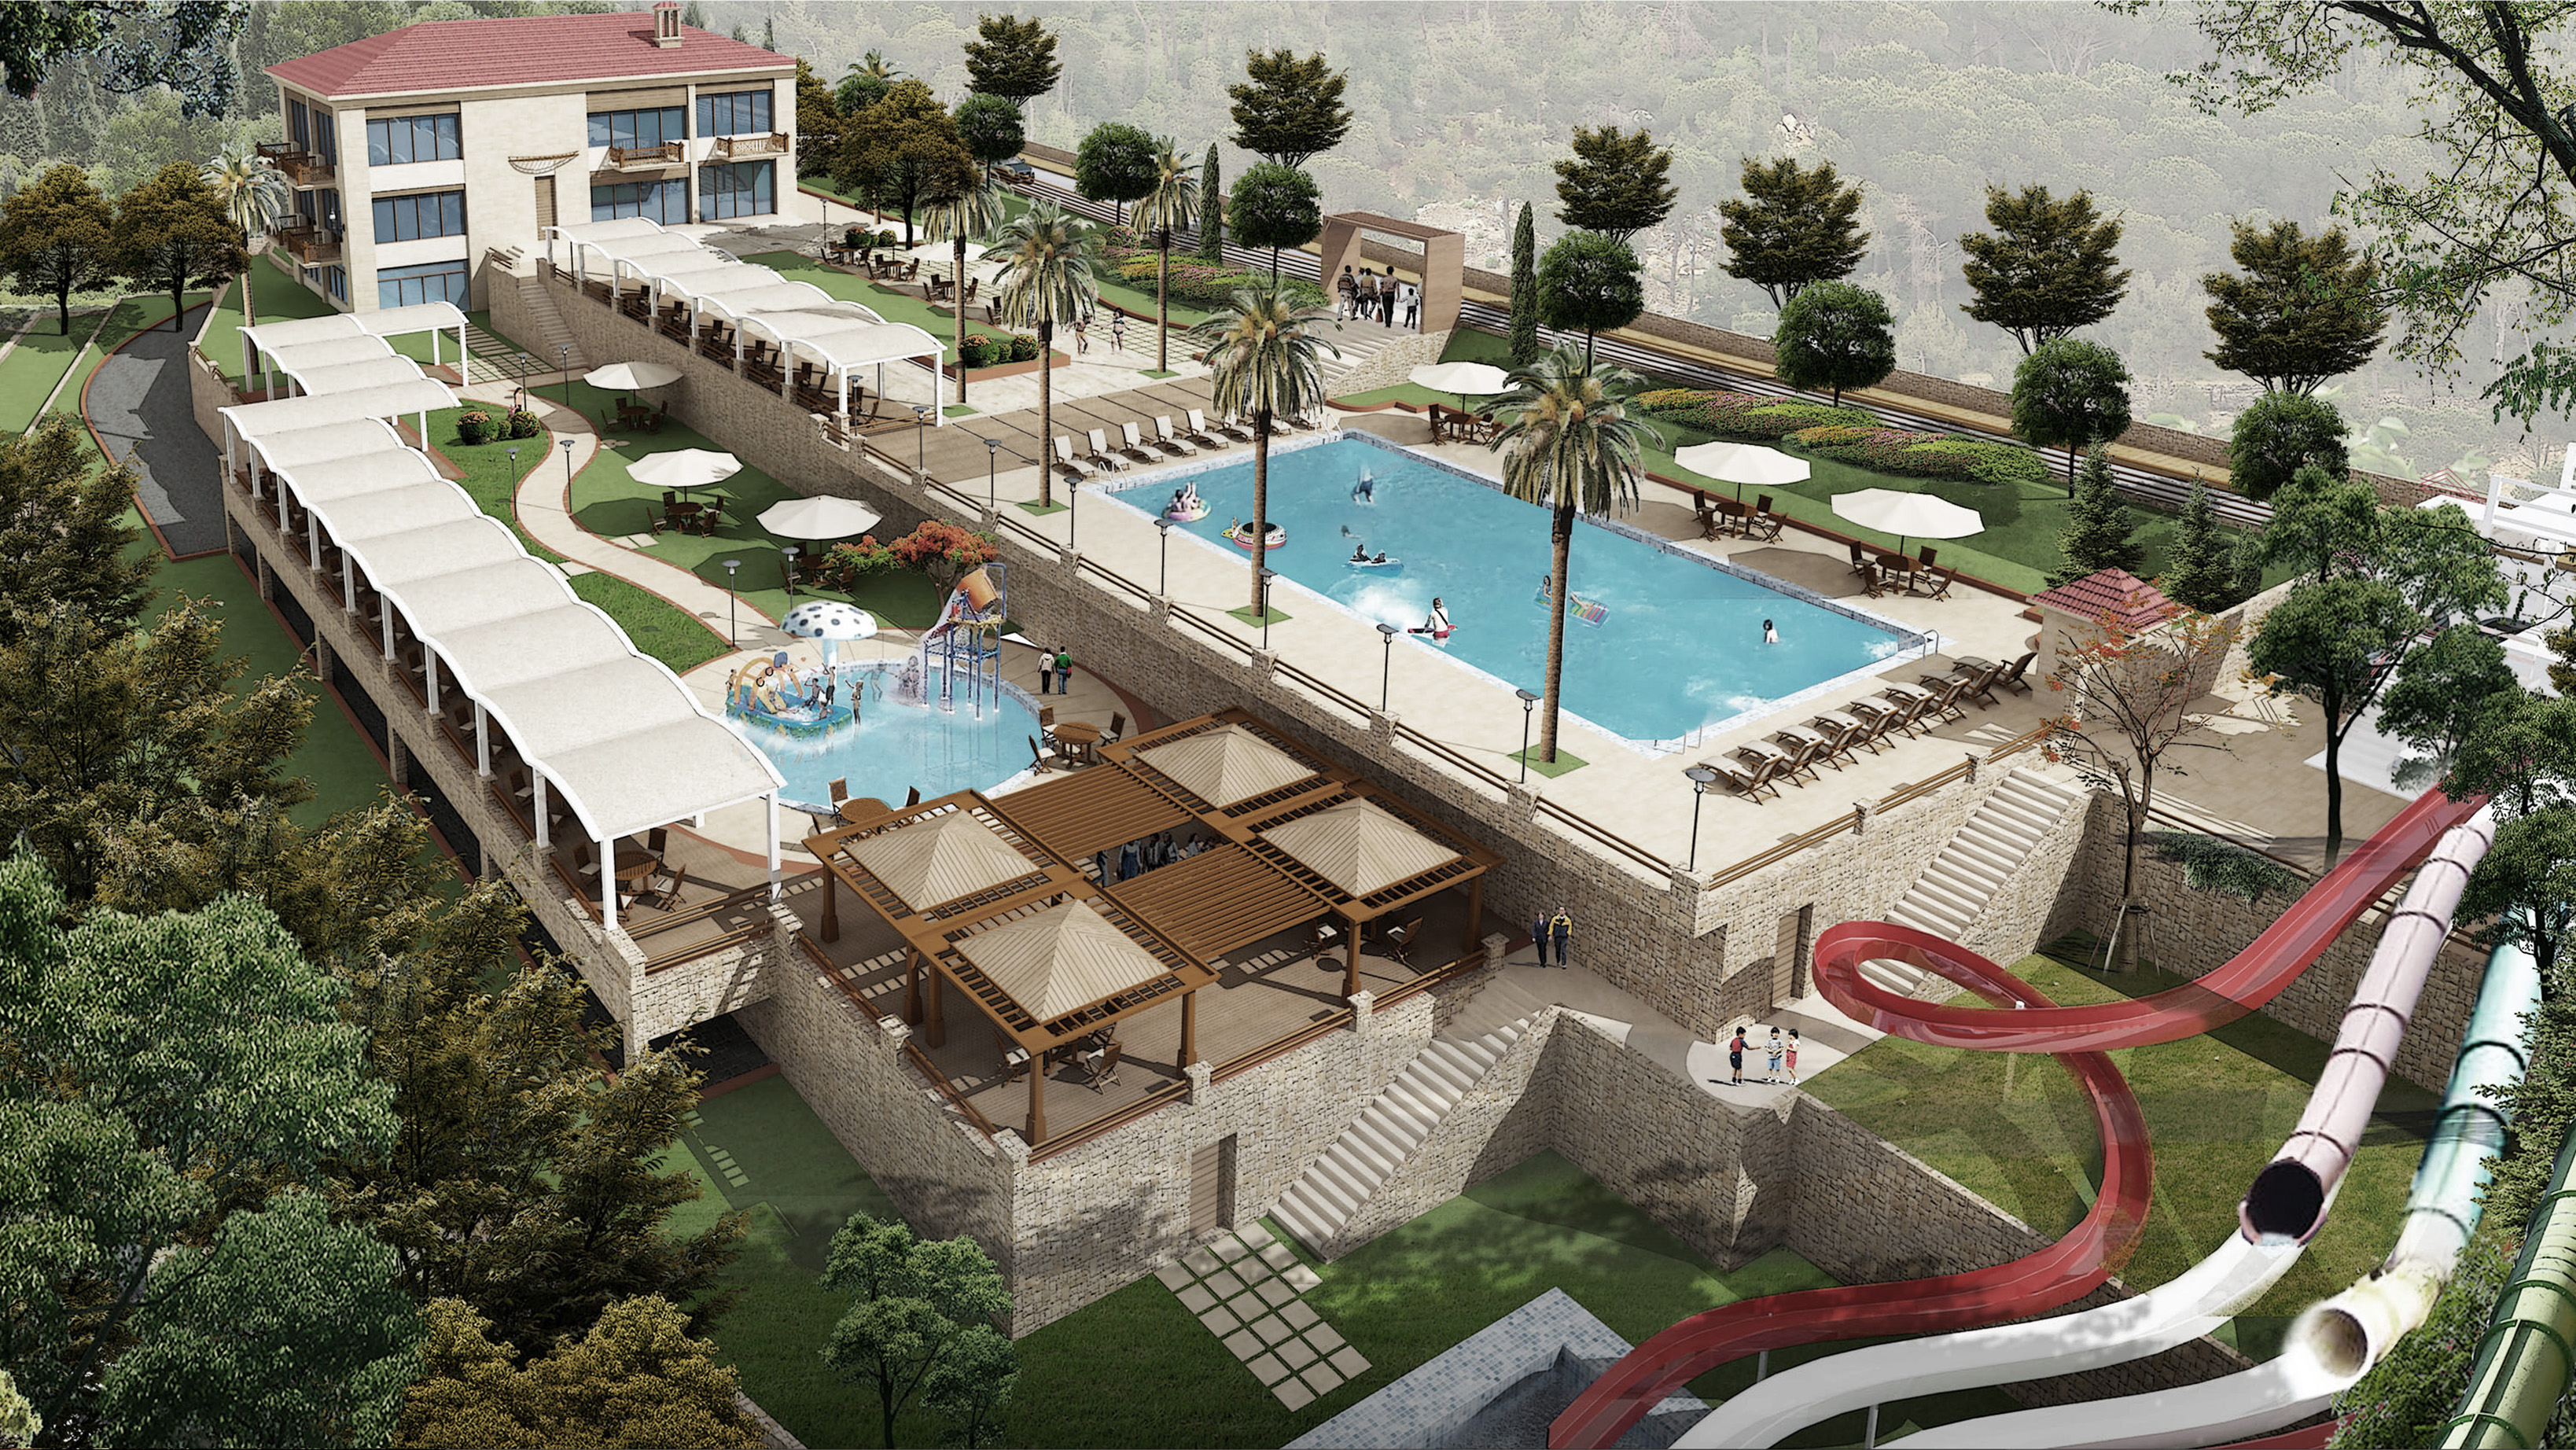 Image of the Litania Resort project